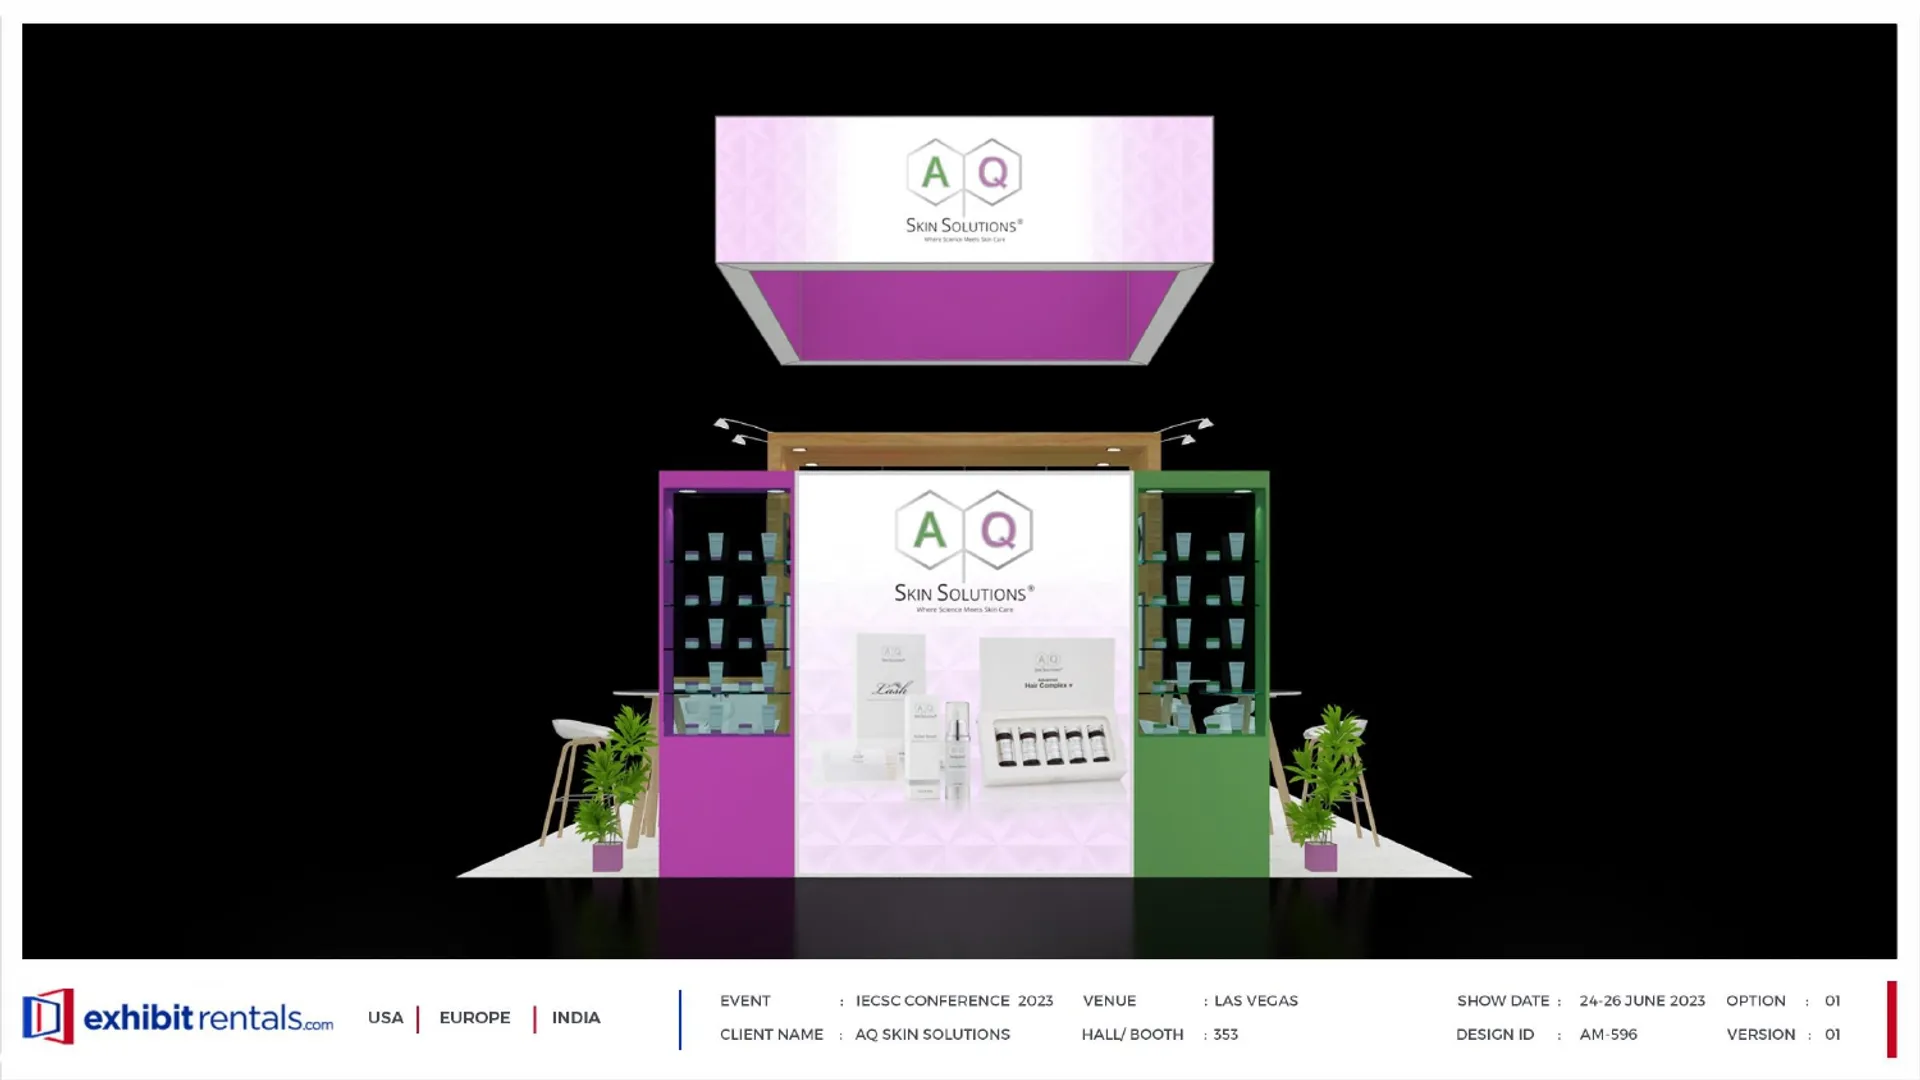 booth-design-projects/Exhibit-Rentals/2024-04-18-20x20-ISLAND-Project-85/1.1_AQ Skin Solutions_IECSC Conference_ER design proposal -18_page-0001-5otl04.jpg